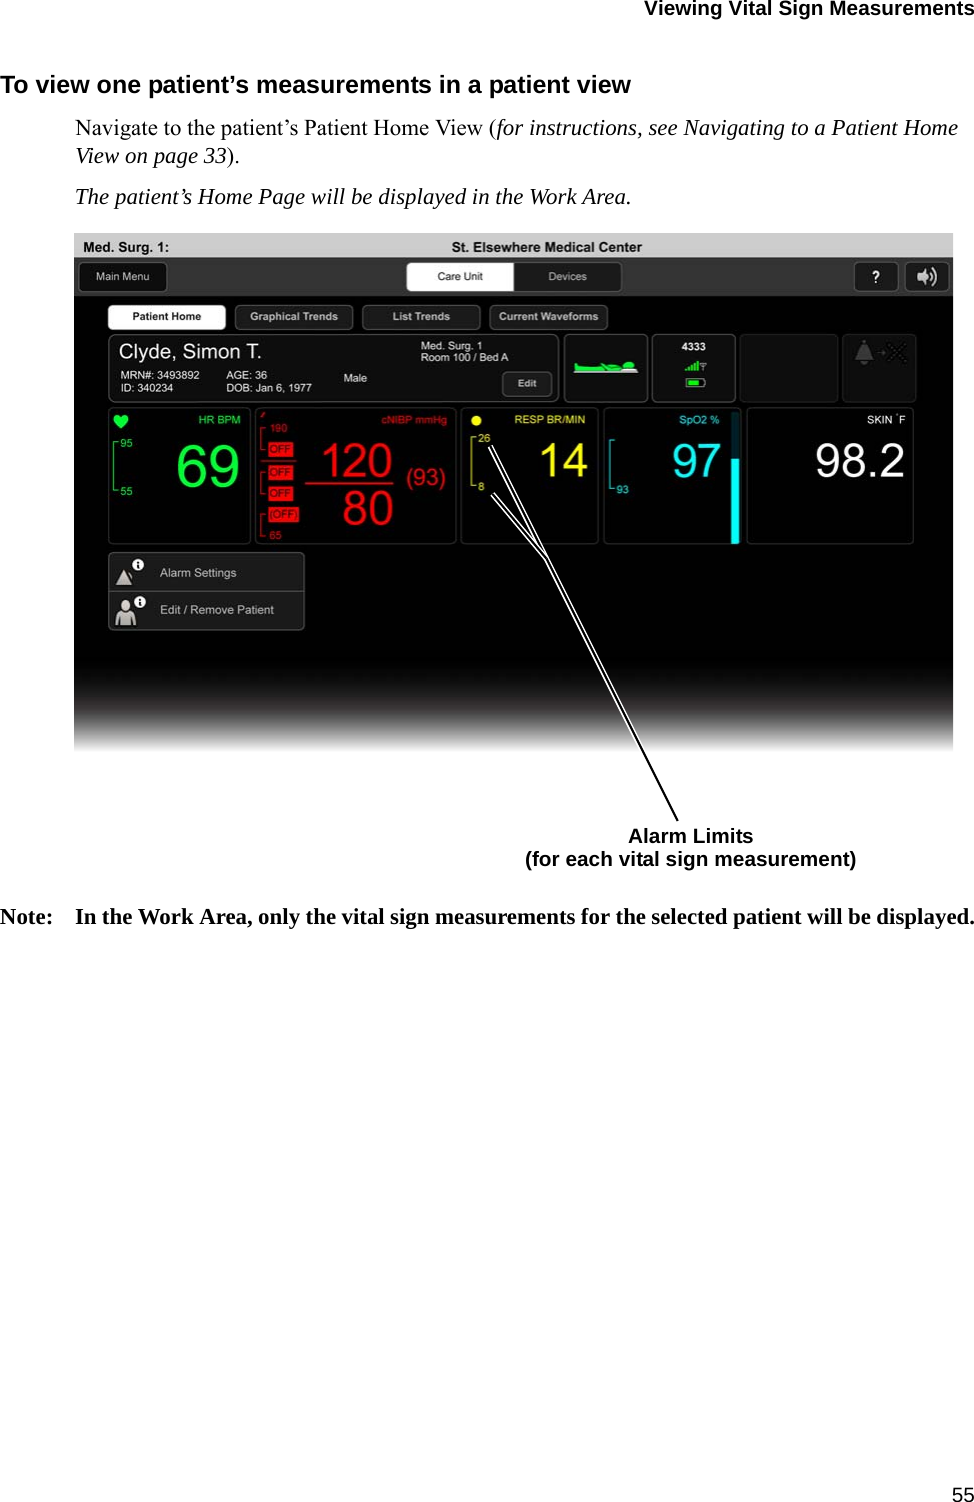 Viewing Vital Sign Measurements55To view one patient’s measurements in a patient viewNavigate to the patient’s Patient Home View (for instructions, see Navigating to a Patient Home View on page 33).The patient’s Home Page will be displayed in the Work Area.Note: In the Work Area, only the vital sign measurements for the selected patient will be displayed.Alarm Limits(for each vital sign measurement)